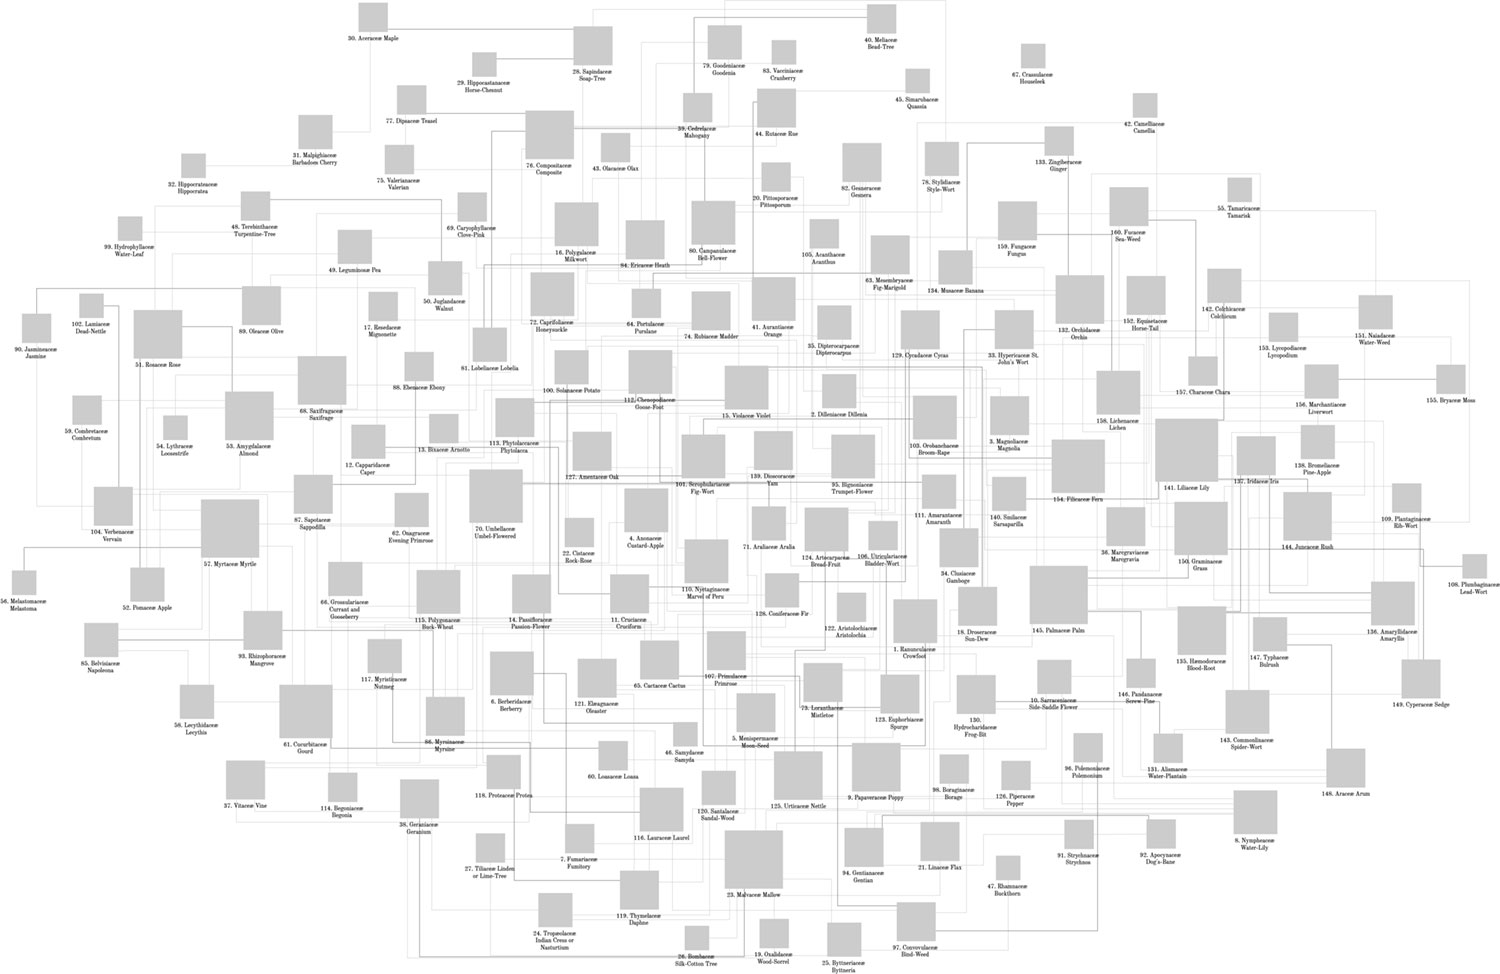 Initial export from Cytoscape